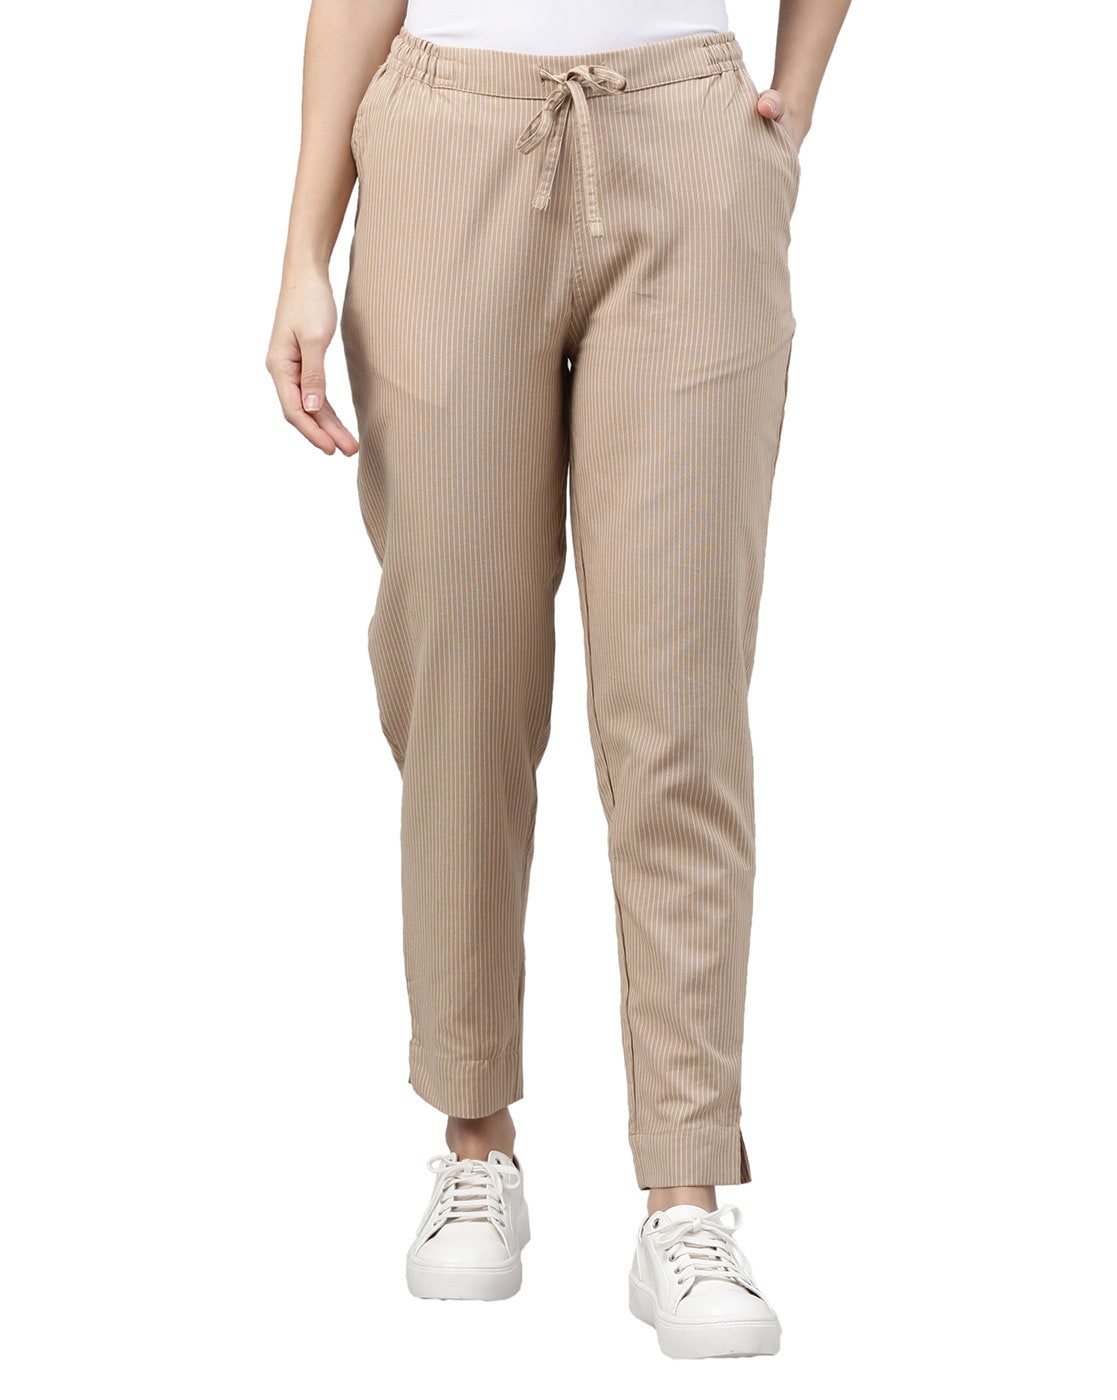 Buy GO COLORS Womens Mid Rise Full Length Trousers  Shoppers Stop